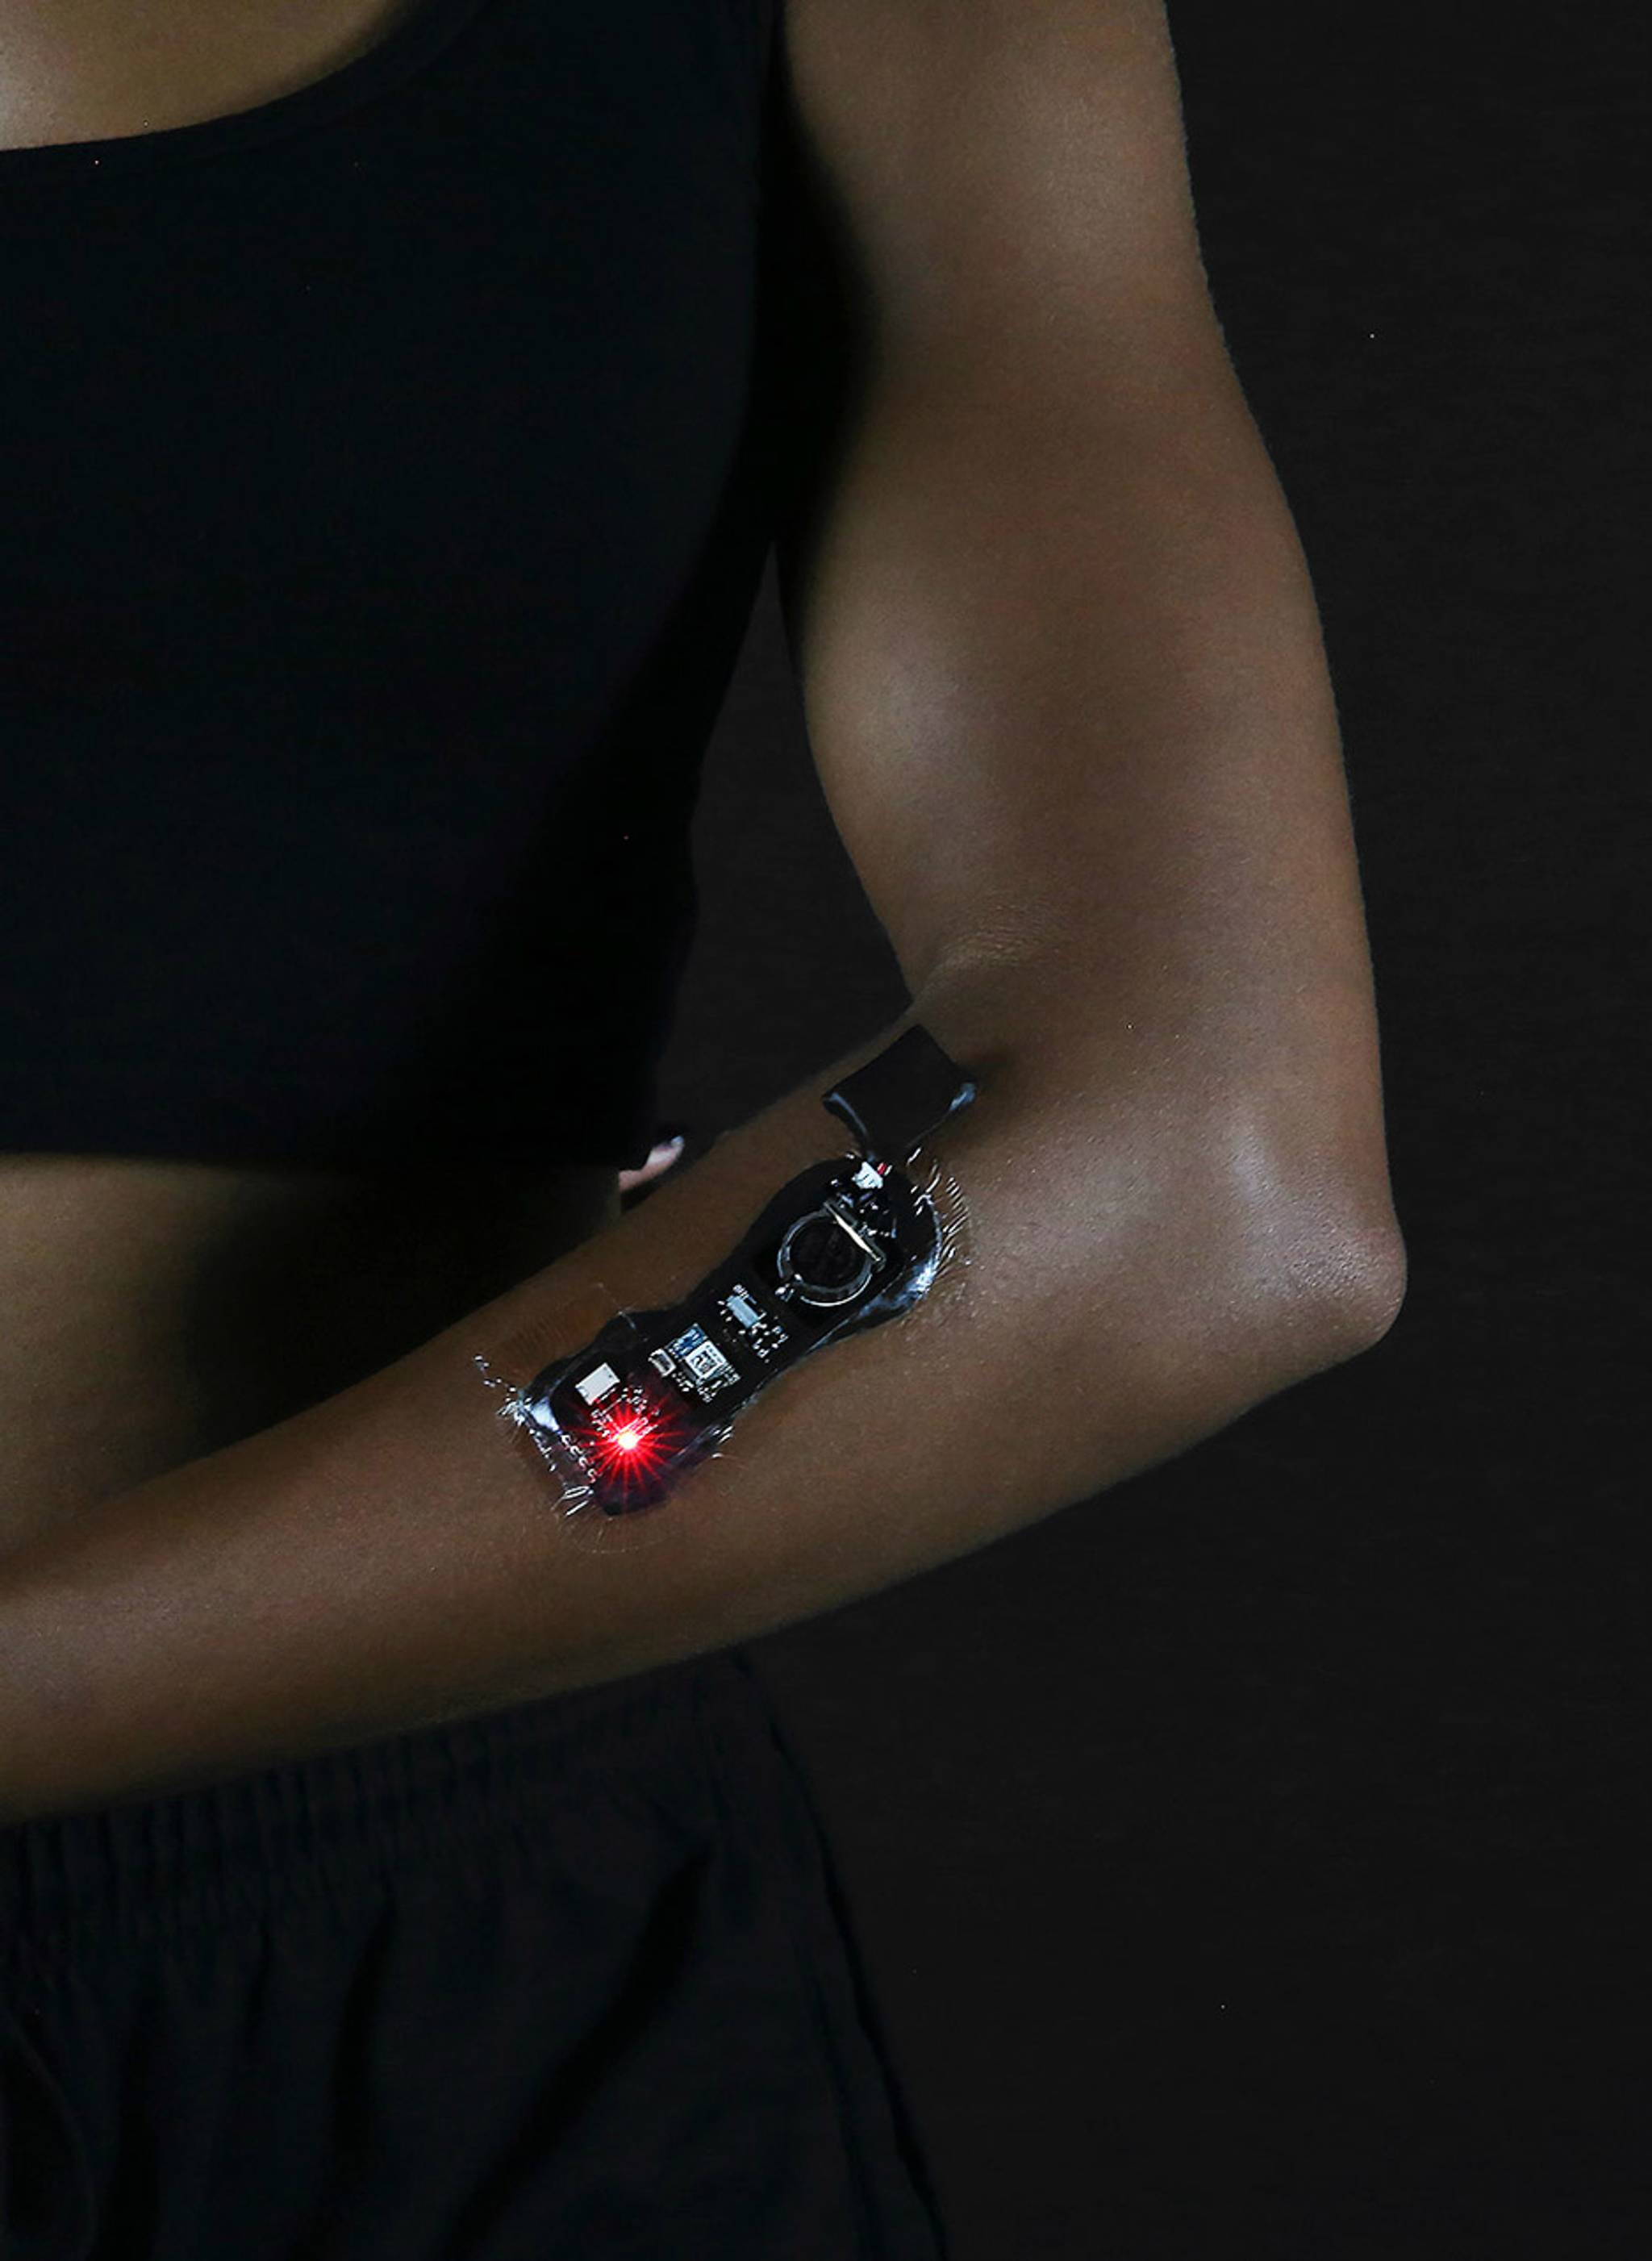 Flexible skin patches take wearable tech to next level